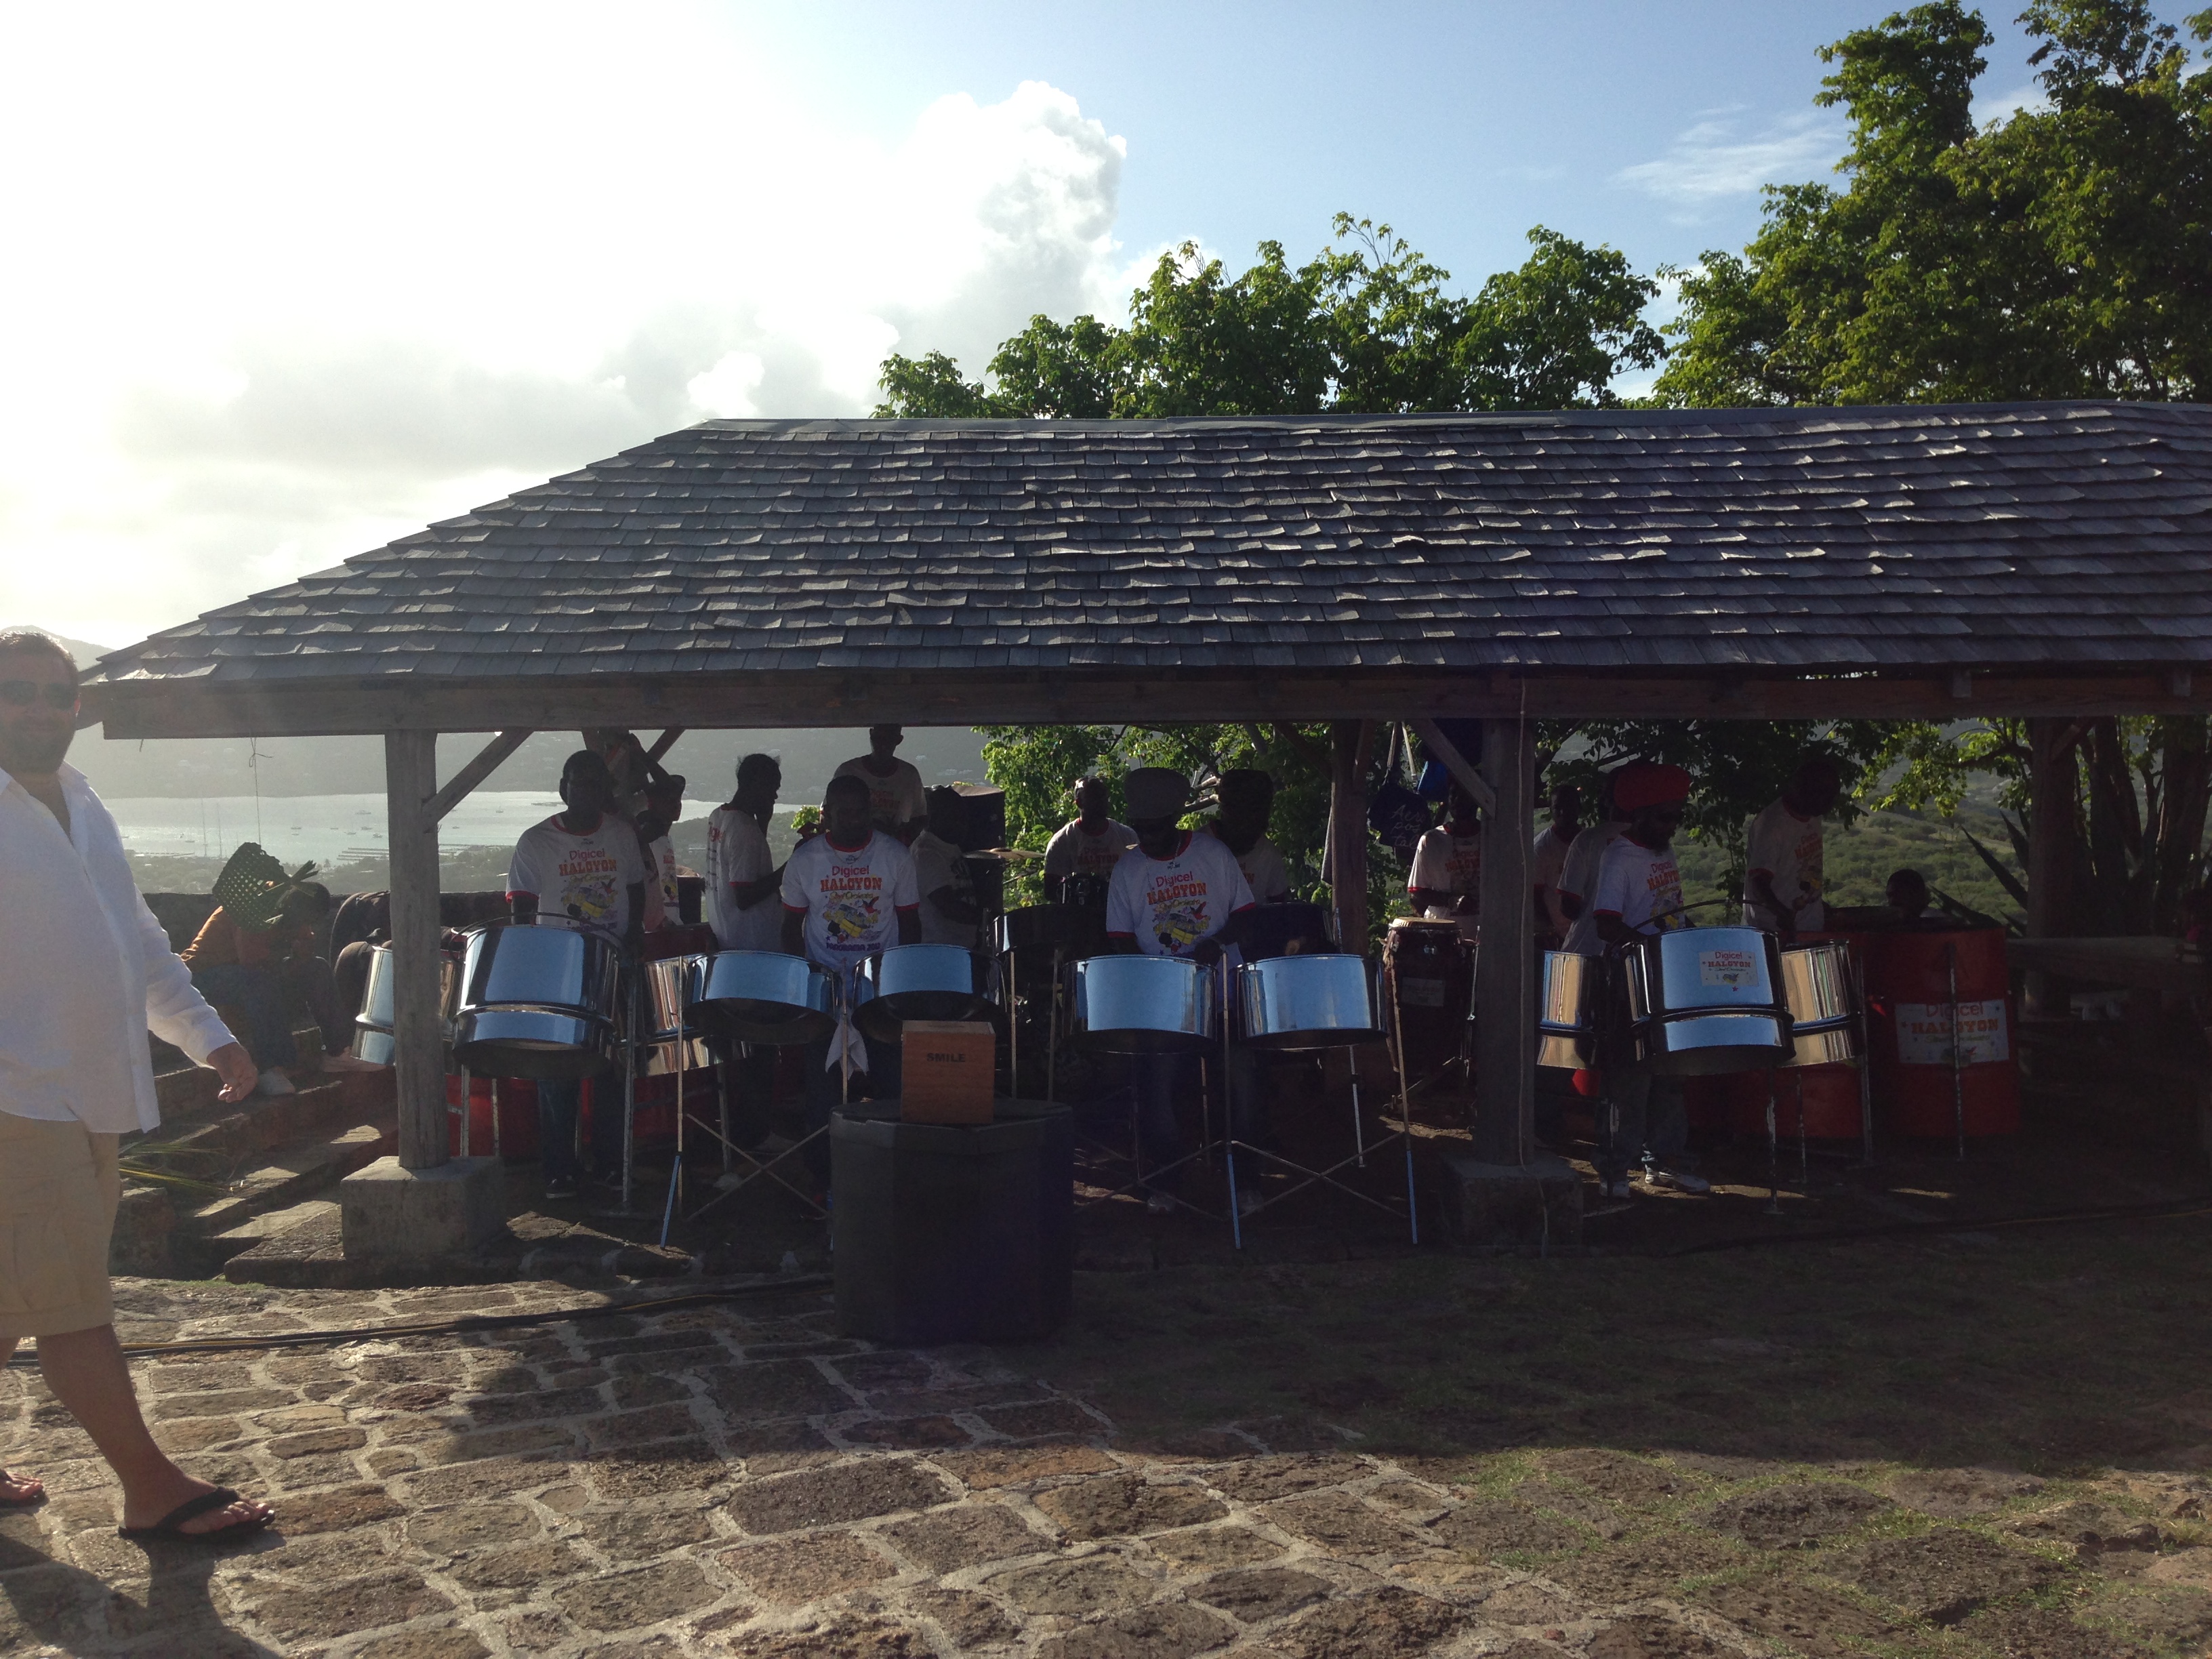 22-piece steel drum band playing during sunset